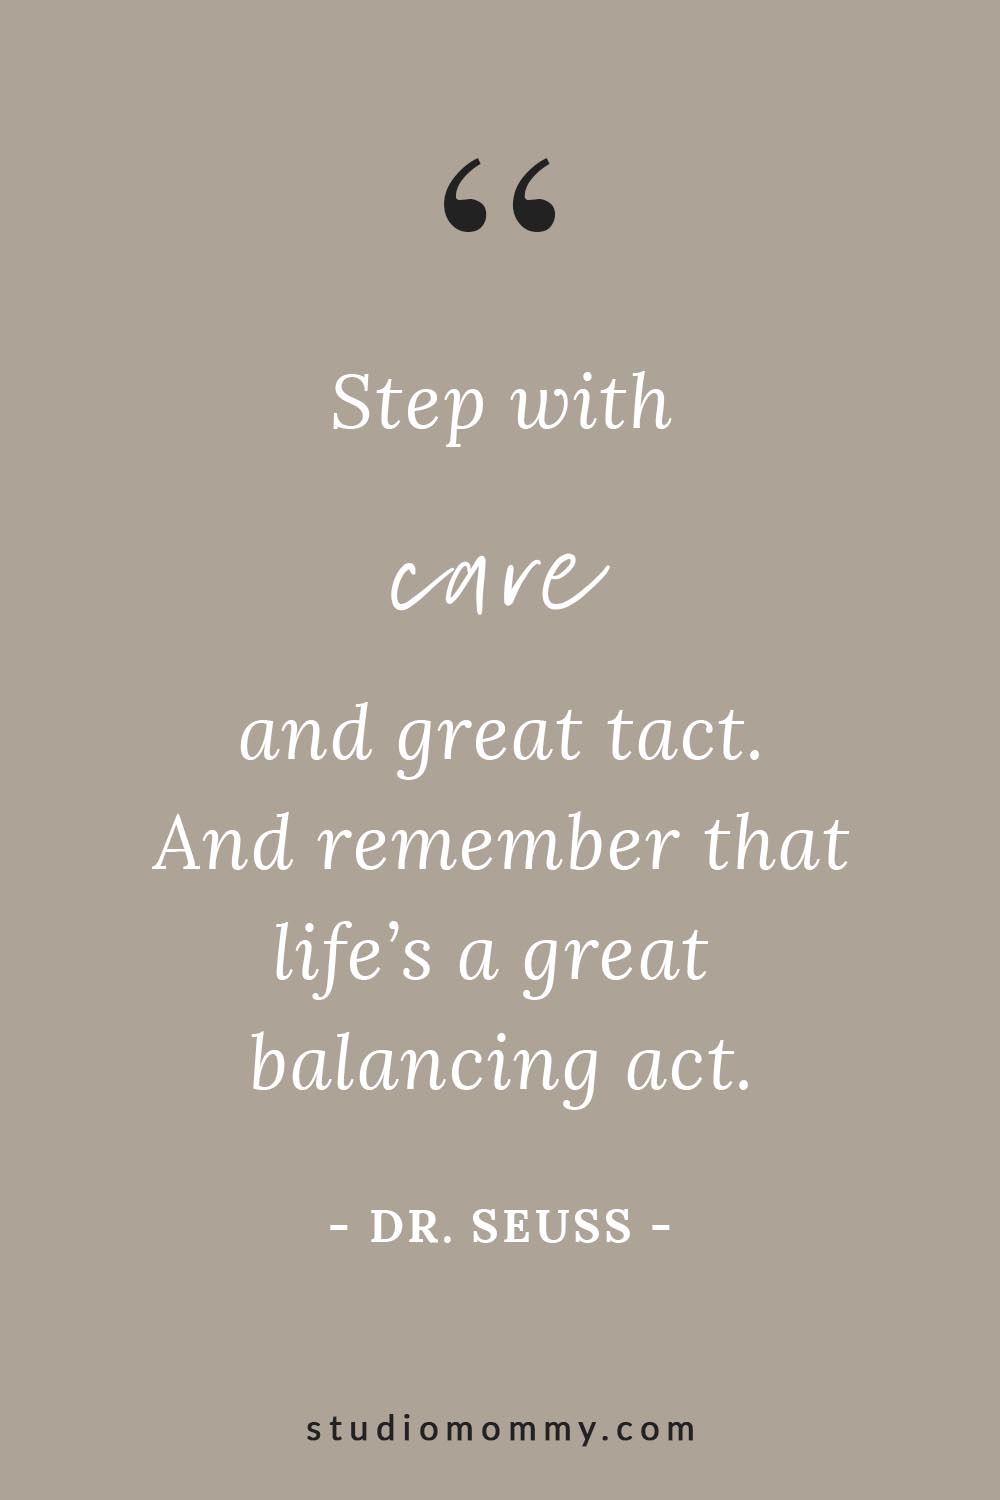 Step with care and great tact. And remember that life's a great balancing act. - Dr. Seuss @studiomommy